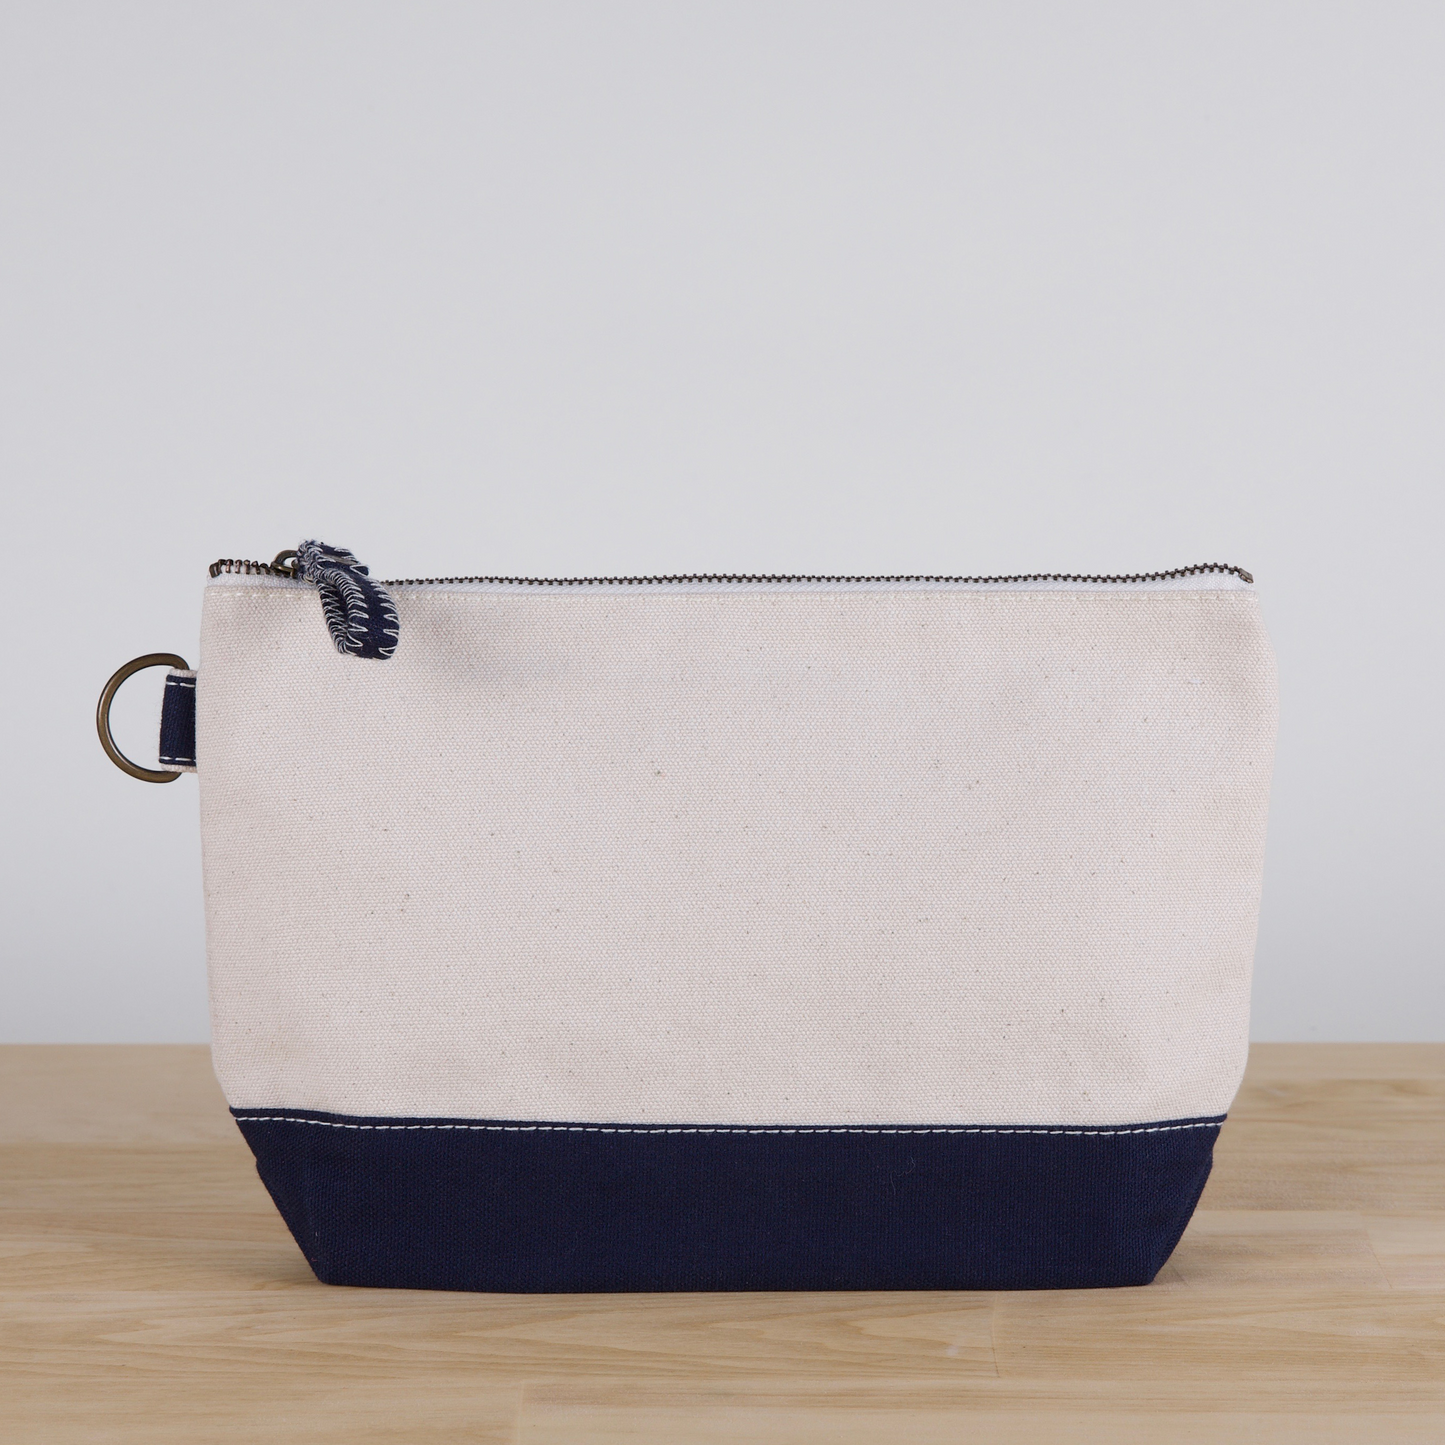 All In Zip Top Pouch by ShoreBags